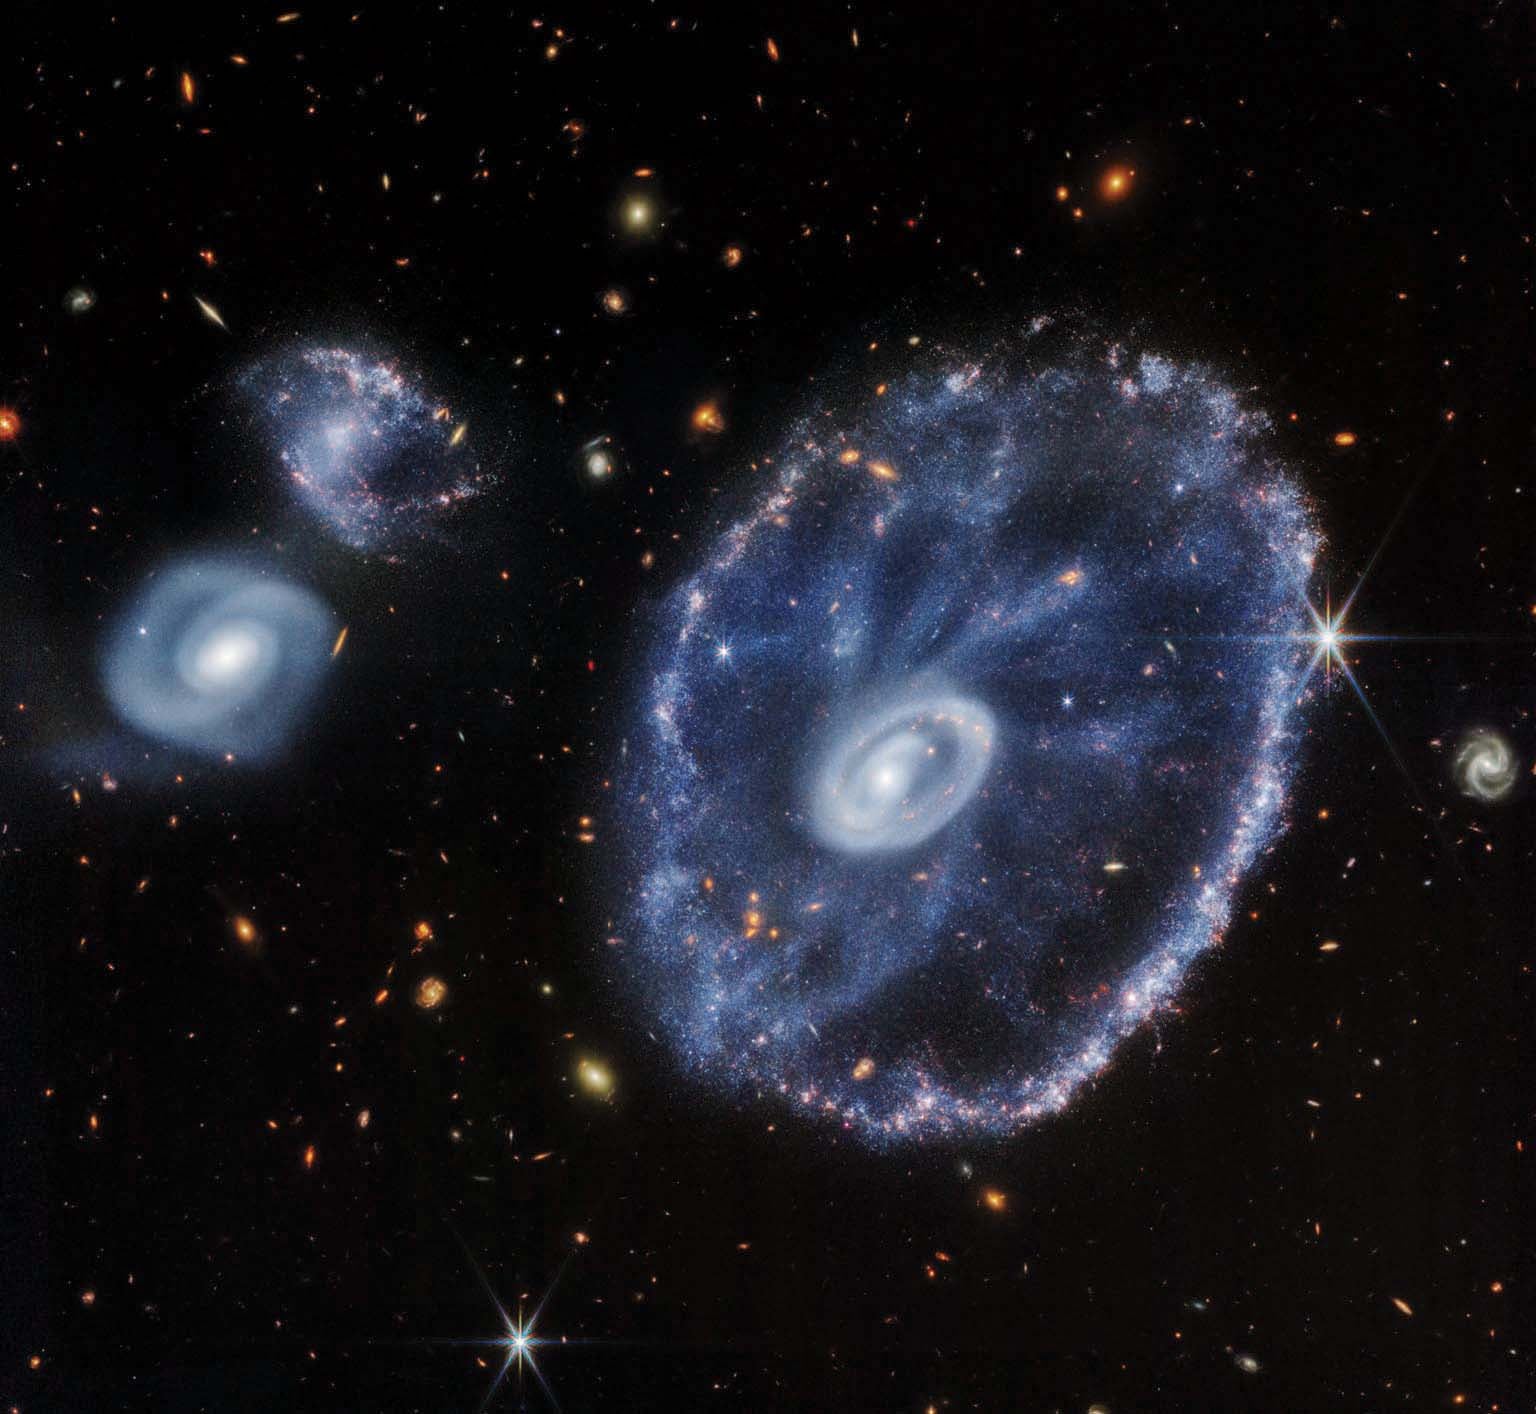 The Cartwheel Galaxy displays its characteristic dust-rich “spokes” and starry inner and outer rings in this near-infrared view from JWST.